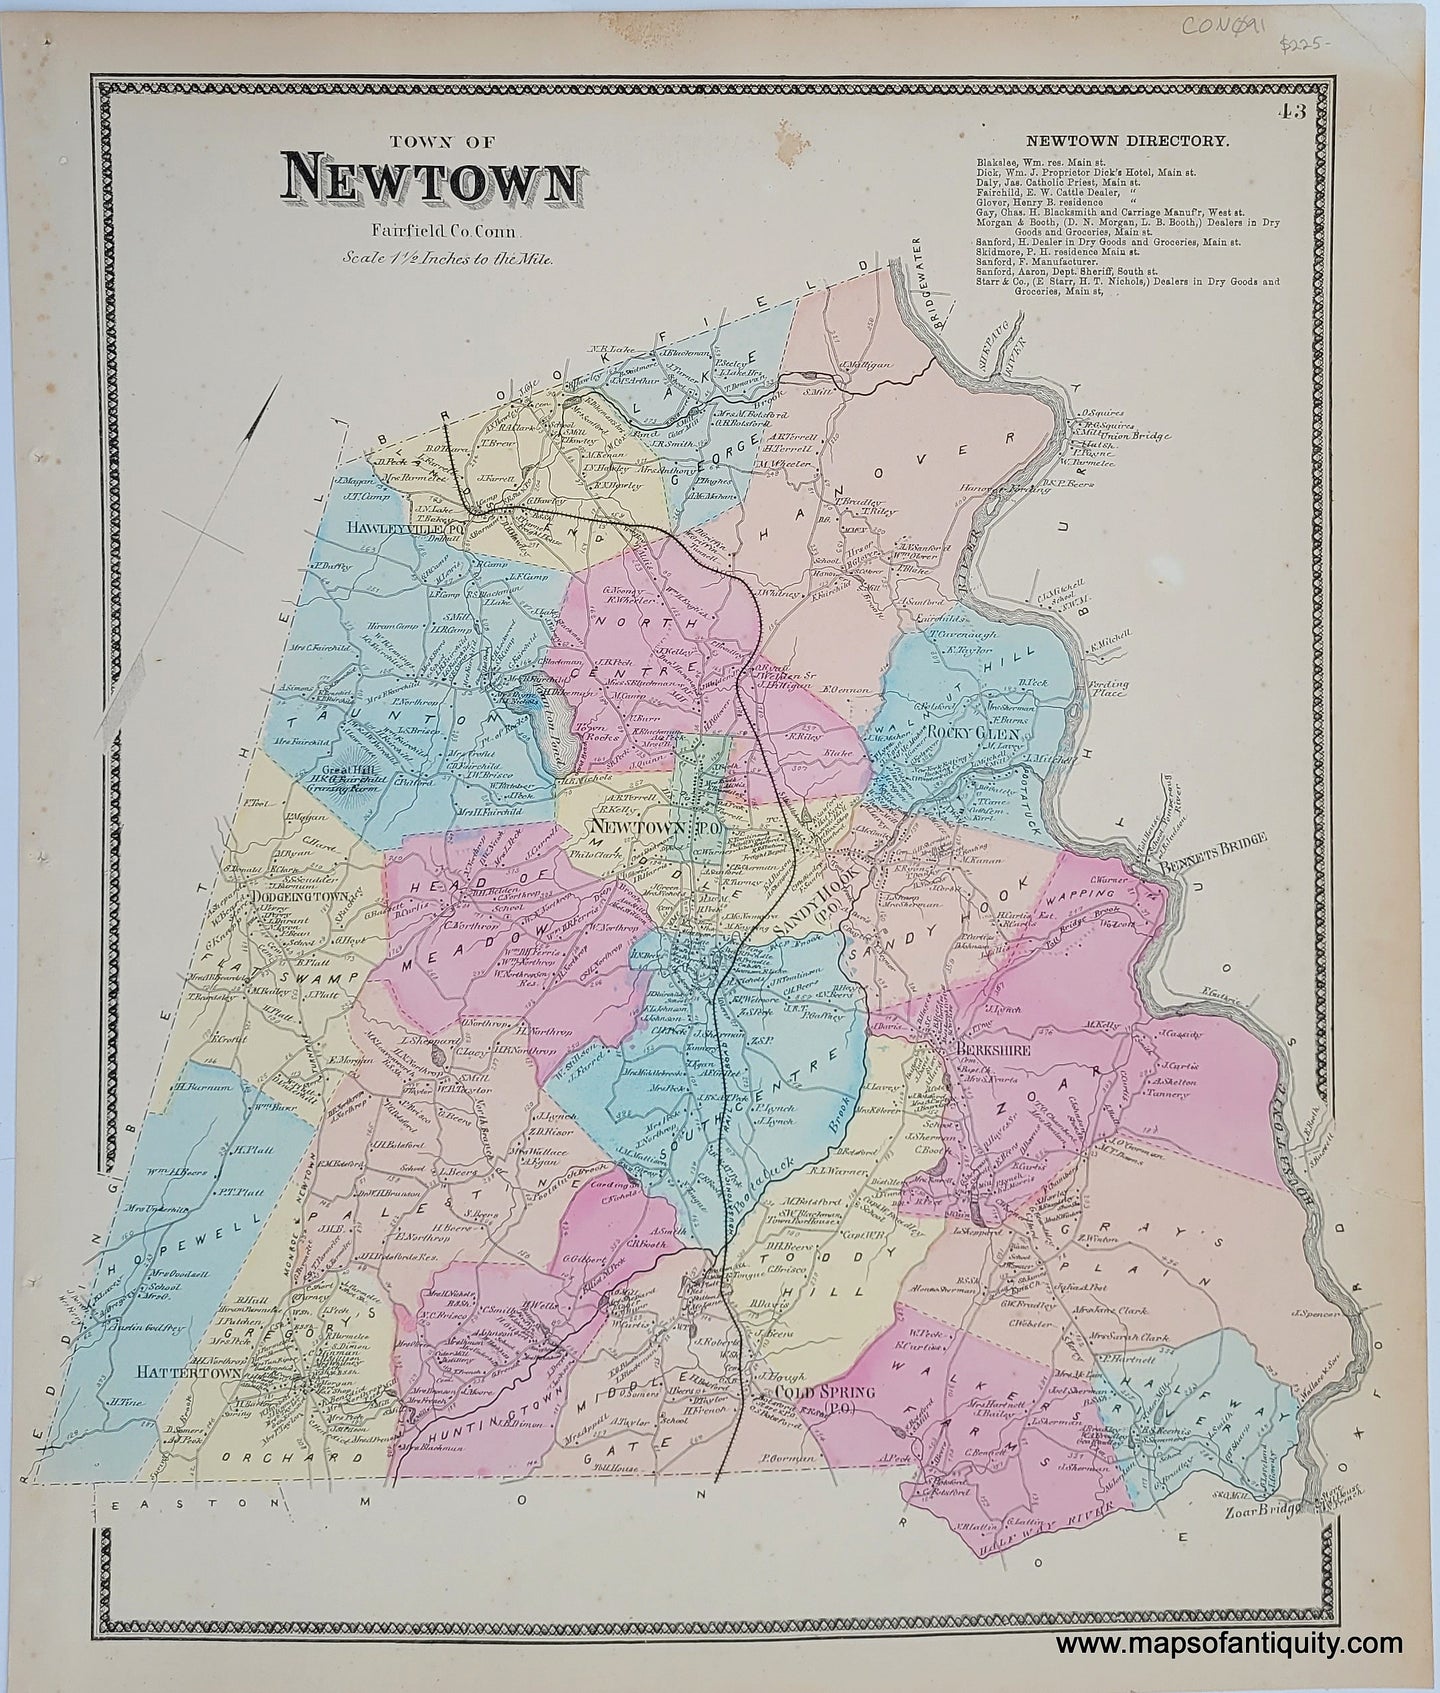 Antique-Map-Town-of-Newtown-Connecticut-CT-1867-Beers-1860s-1800s-19th-century-Maps-of-Antiquity